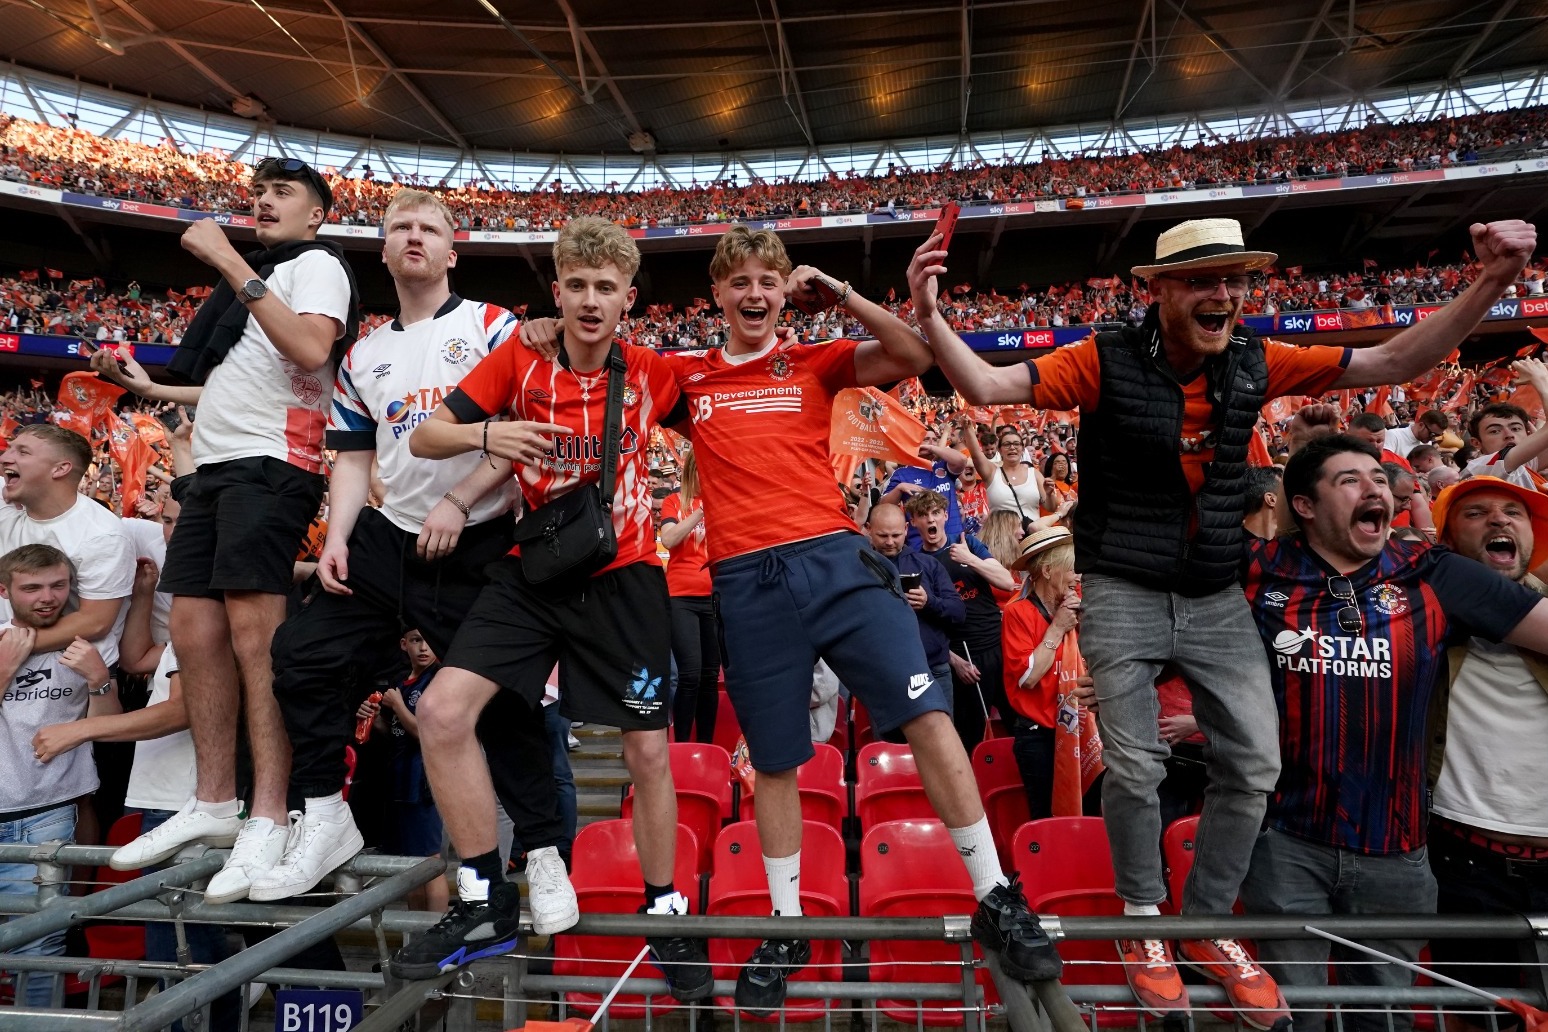 Luton Town promoted to the Premier League